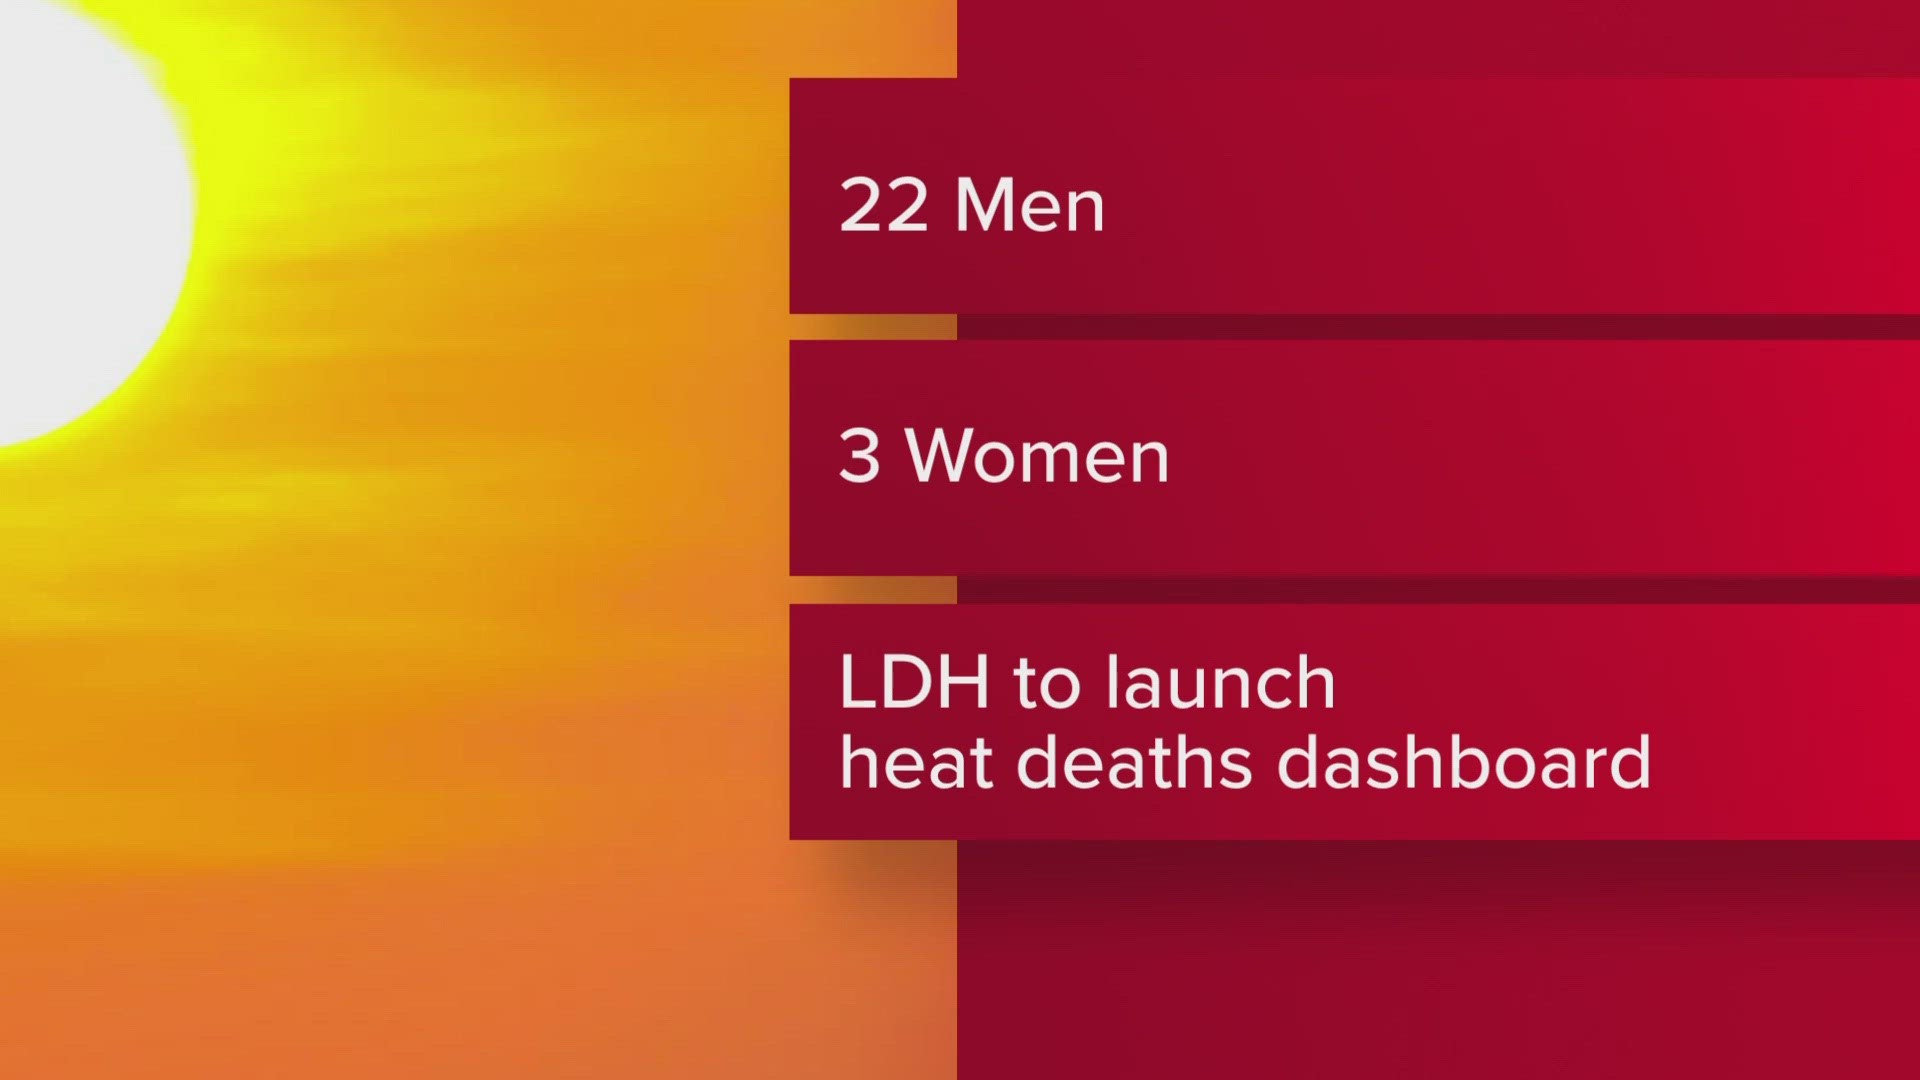 The Louisiana Department of Health says 25 people have died due to heat-related illness in the months of June, July, and August.